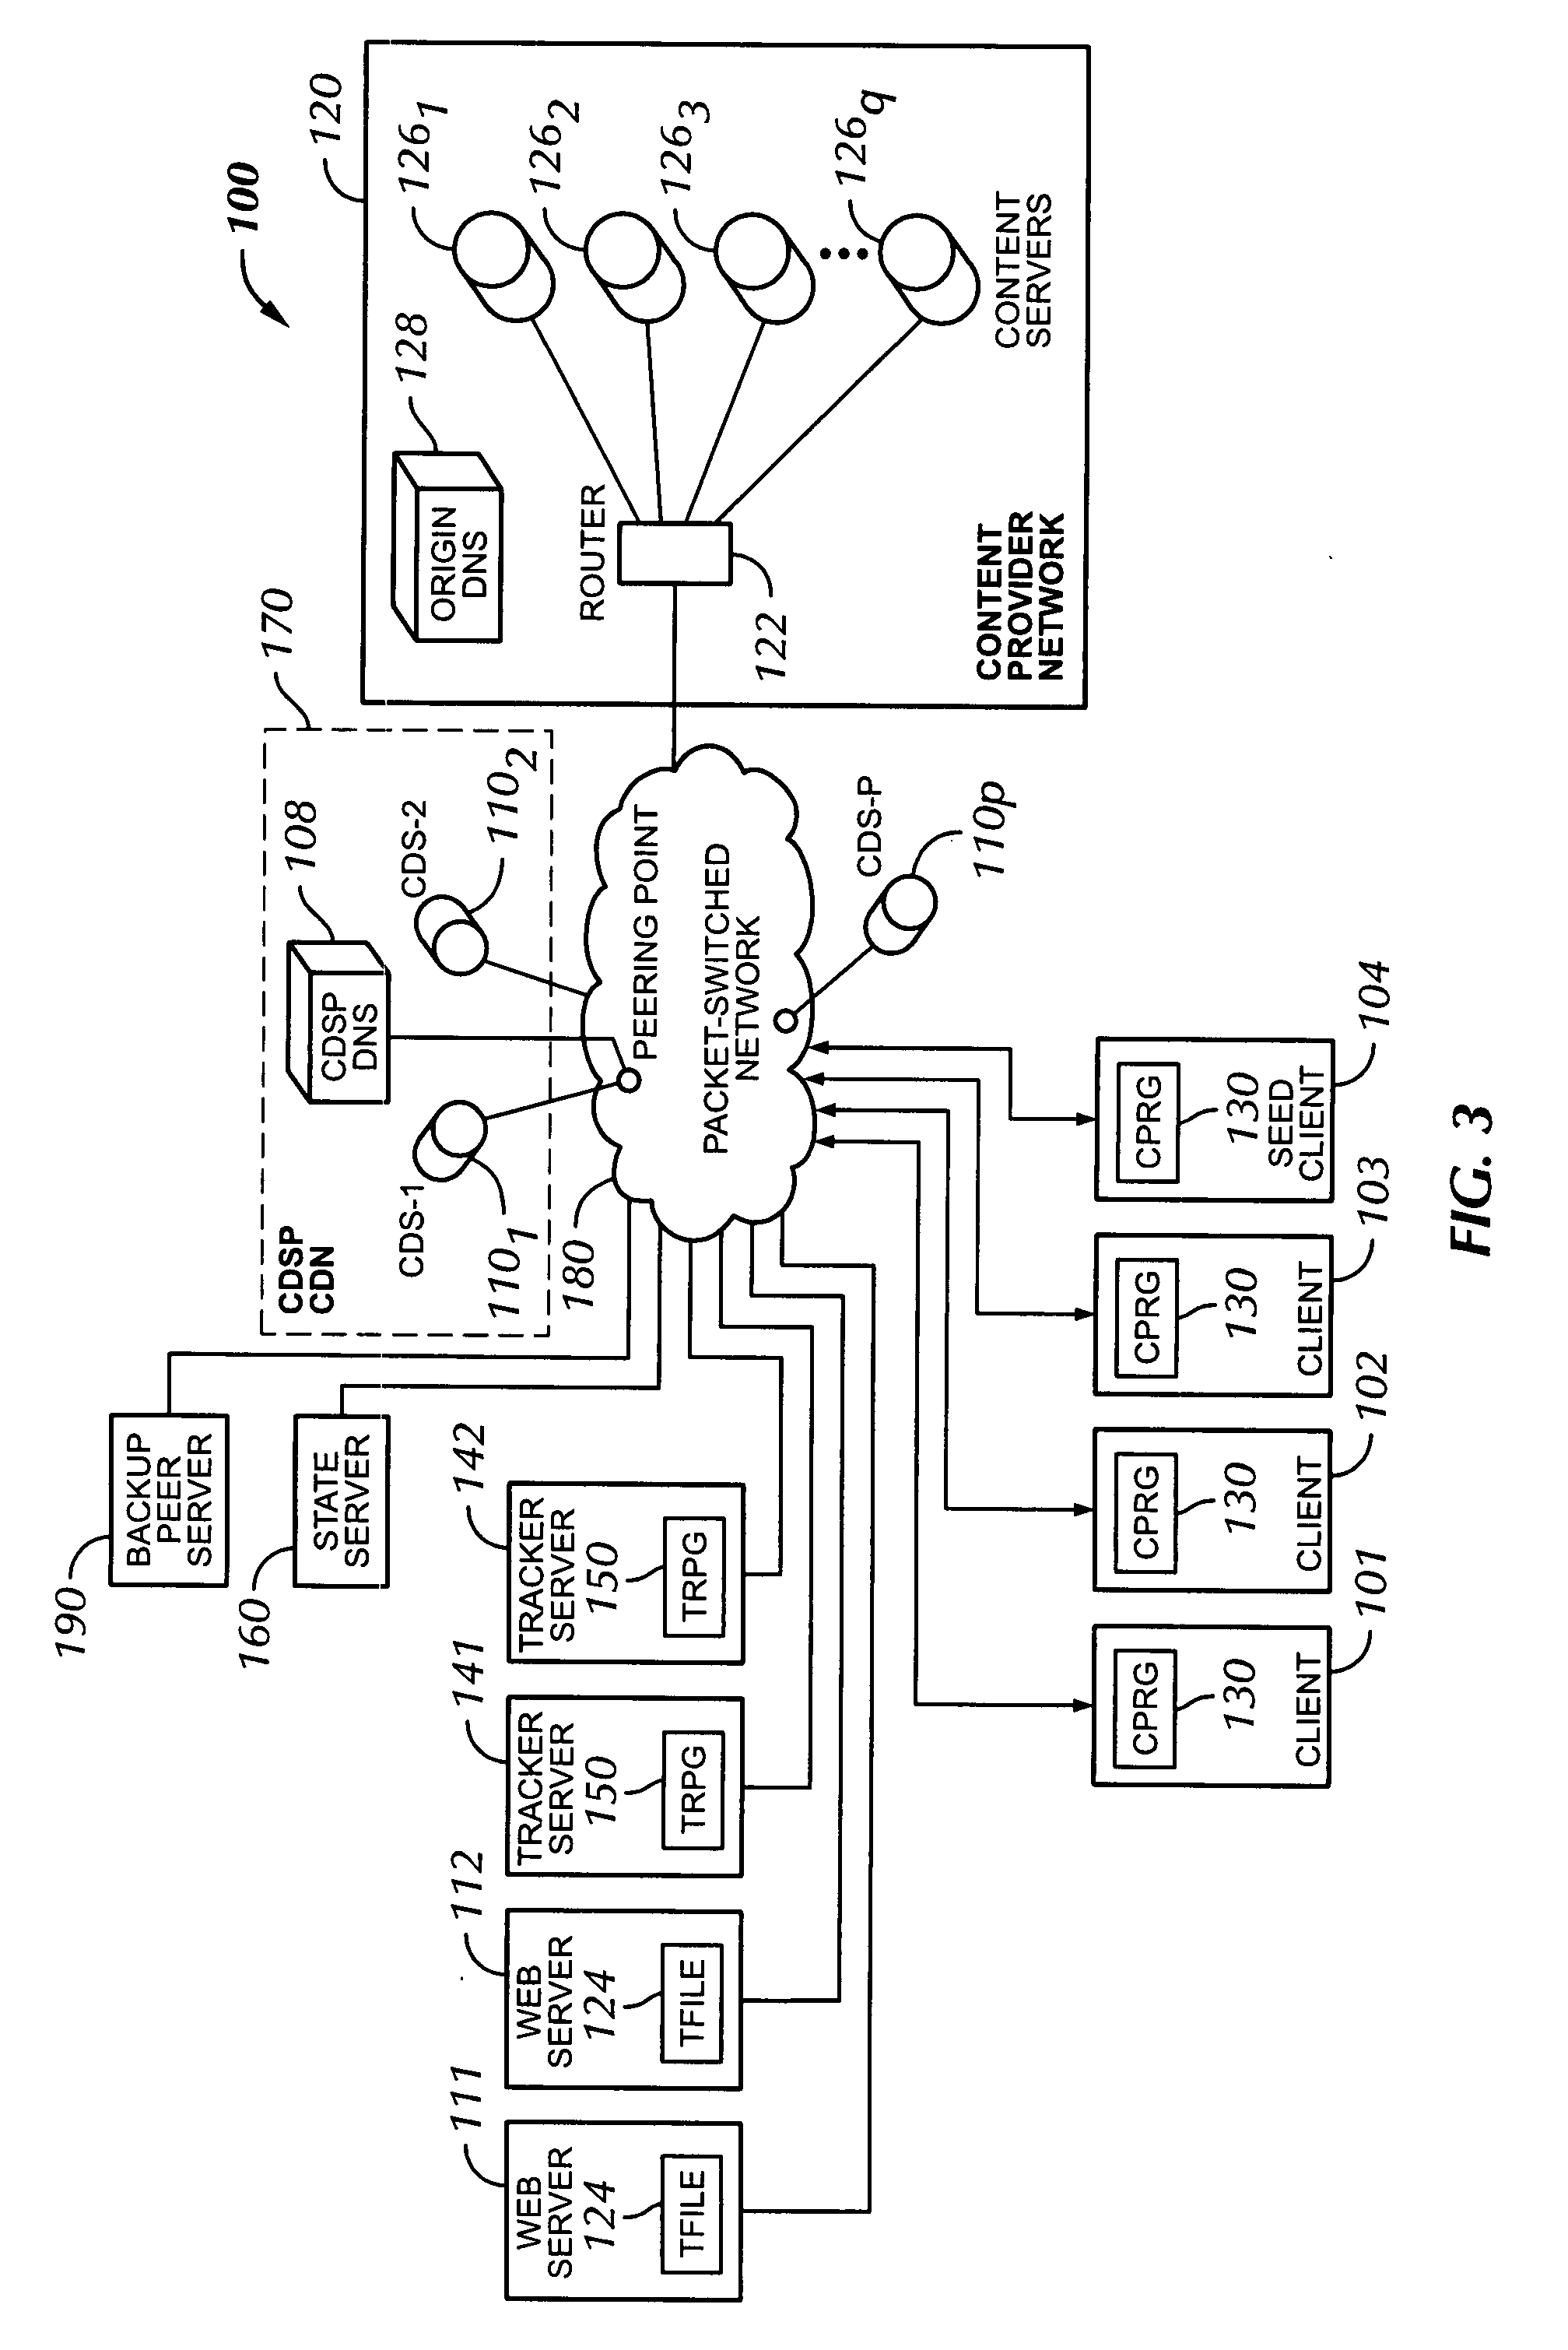 Method and apparatus for transferring files to clients using a peer-to-peer file transfer model and a client-server transfer model